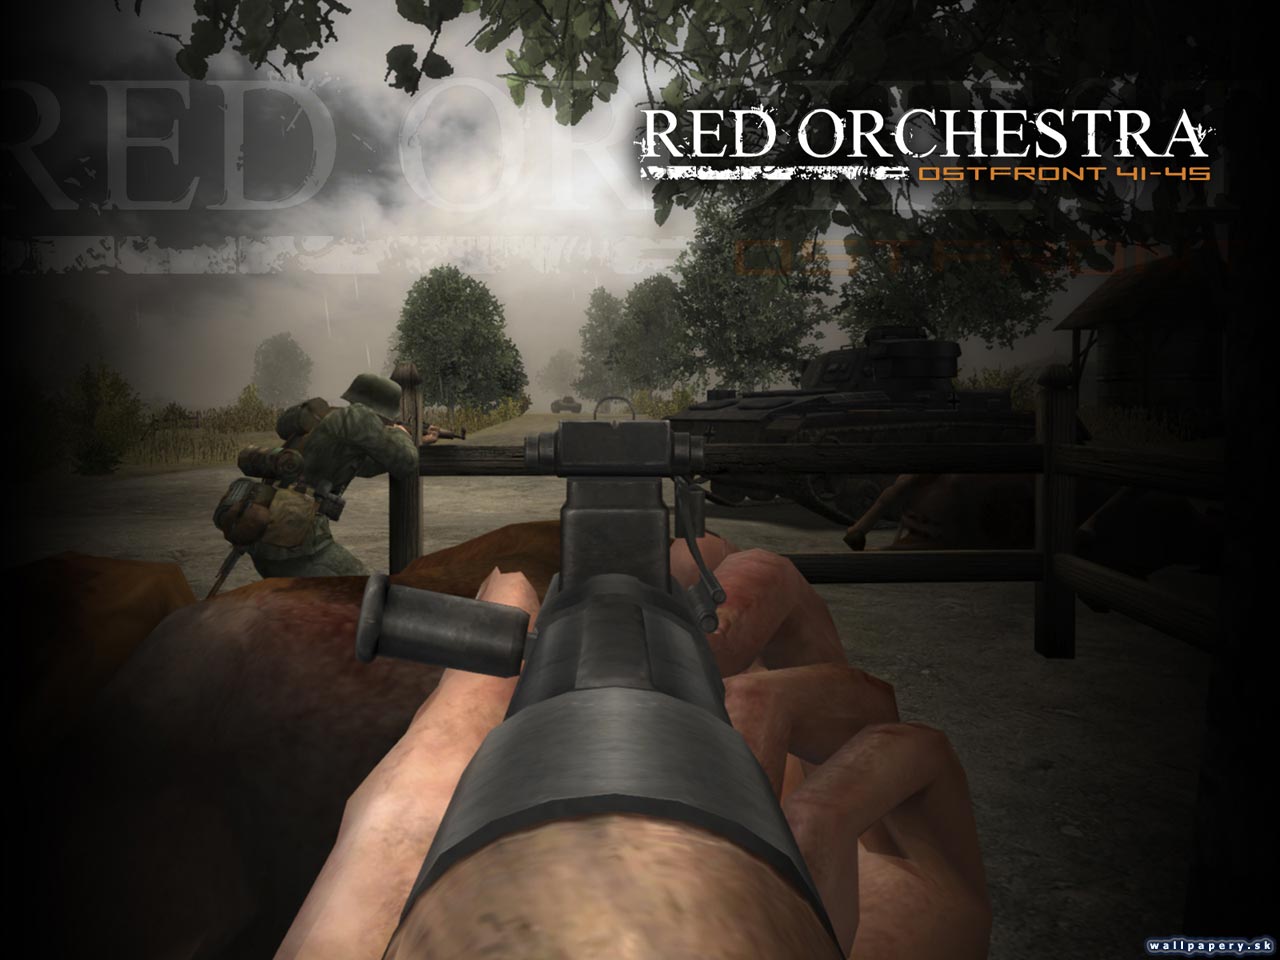 Red Orchestra: Ostfront 41-45 - wallpaper 2